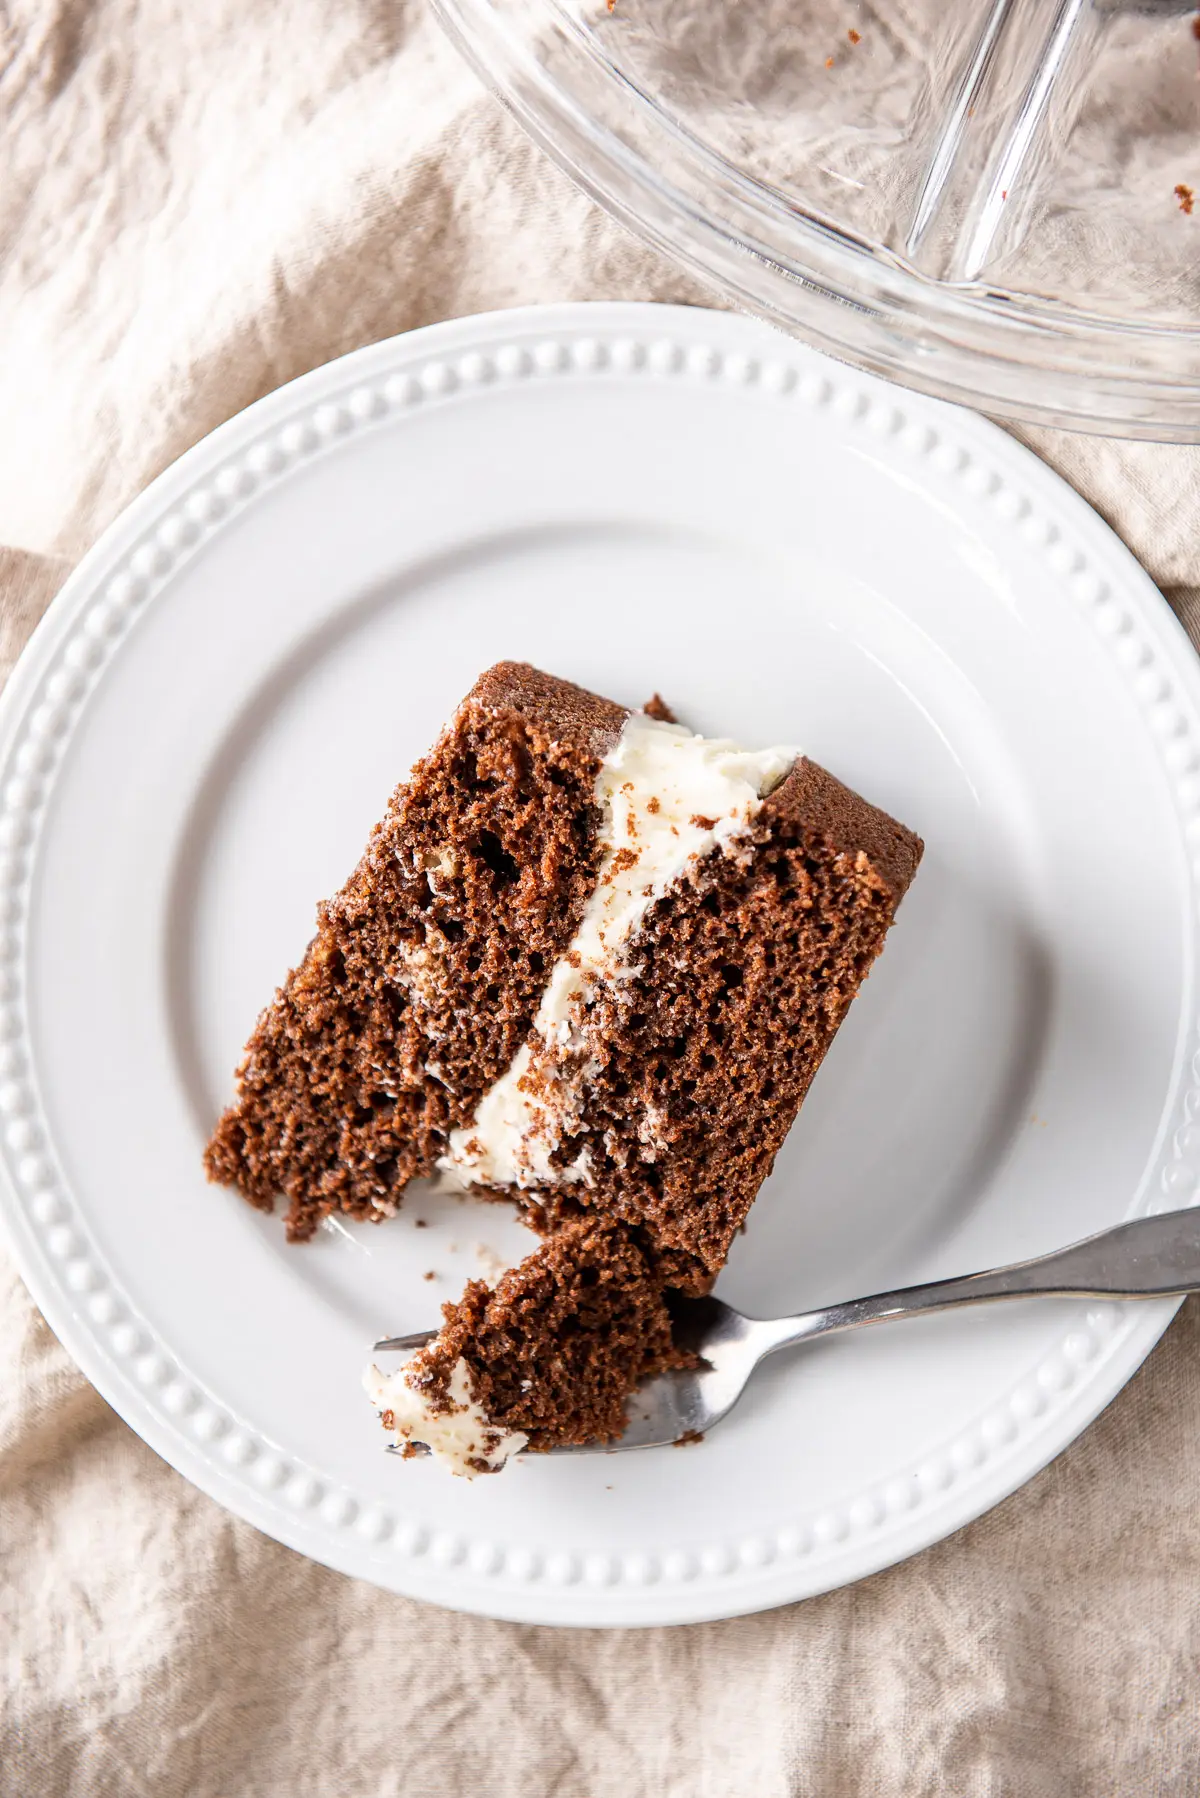 Overhead view of a white plate with a layered chocolate cake. There is a fork with a piece of cake on it